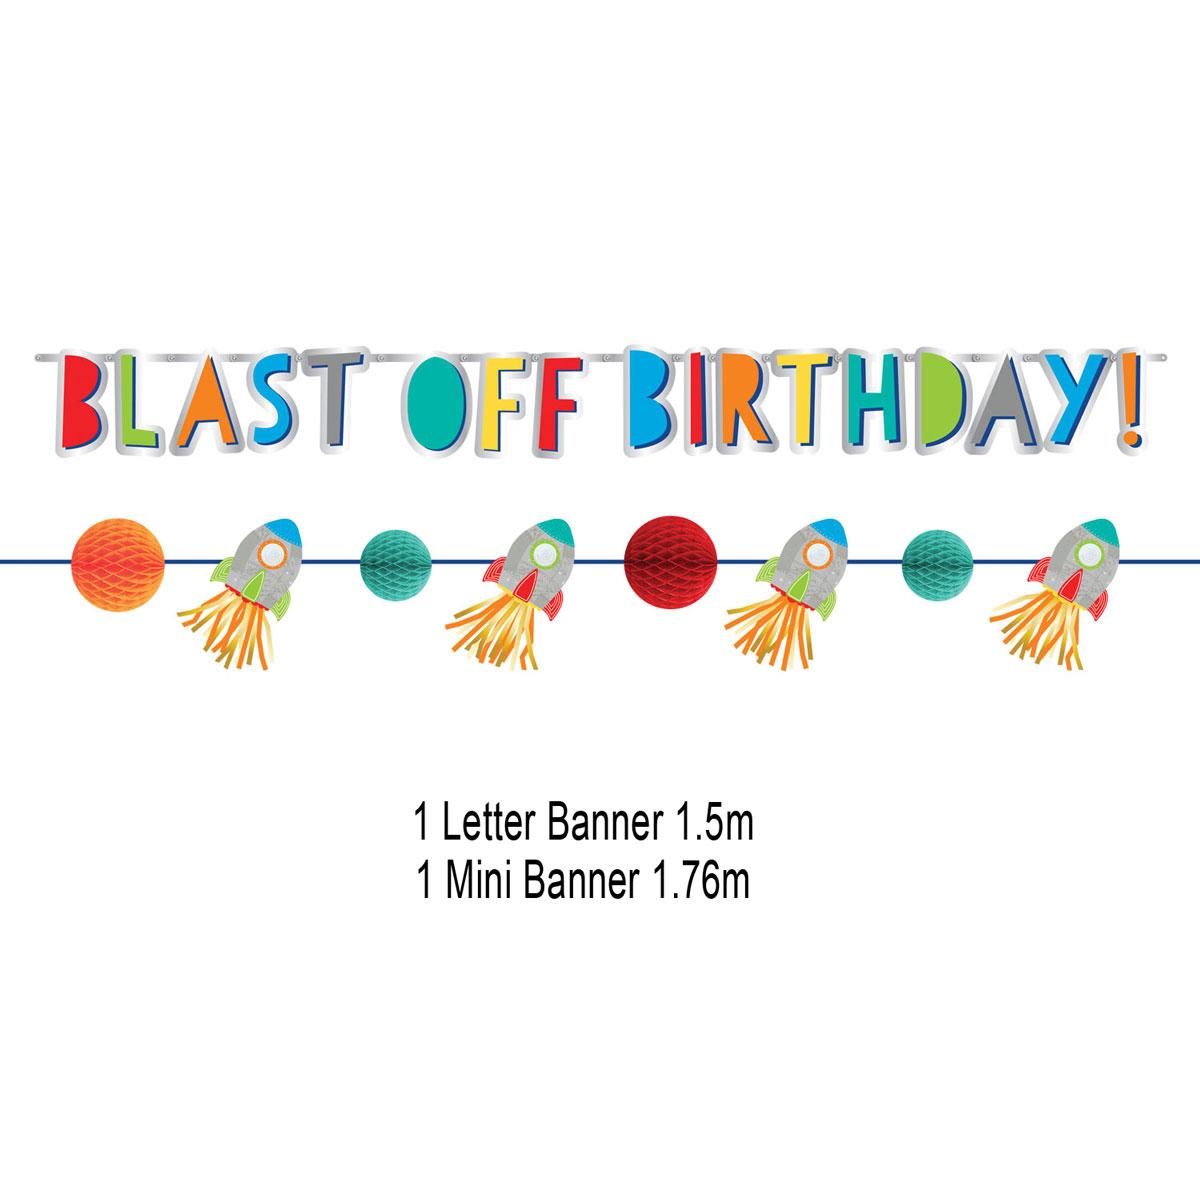 Blast Off Birthday Banner Kit by Amscan 120440 available here at Karnival Costumes online party shop